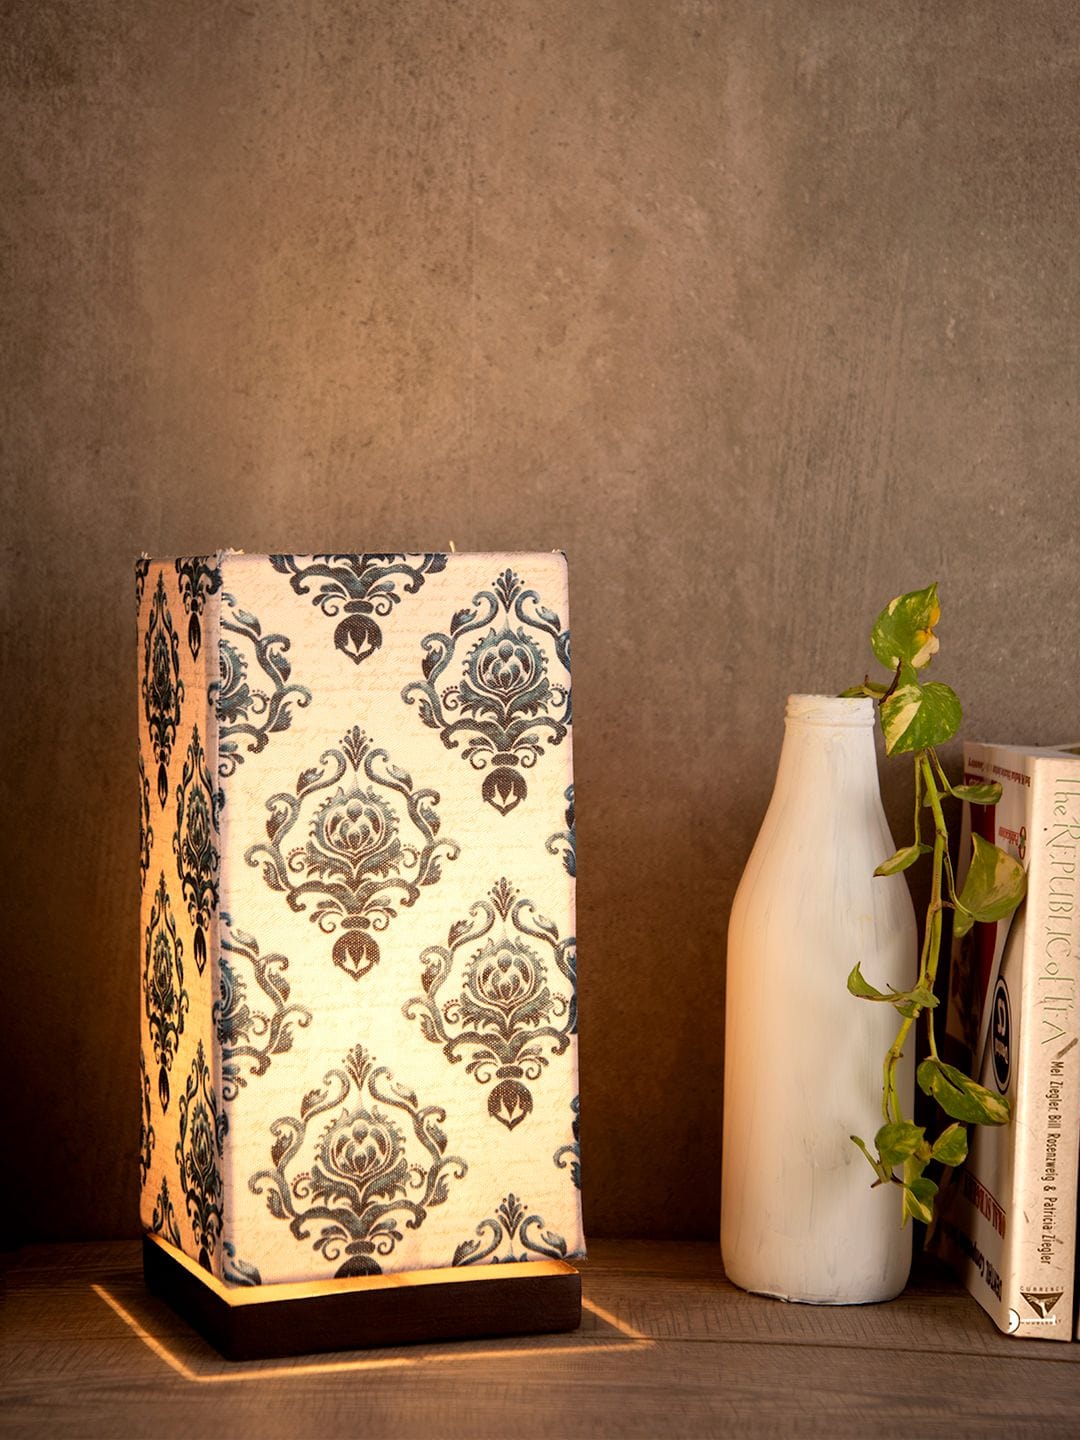 Block Print Lamp with Wooden Base